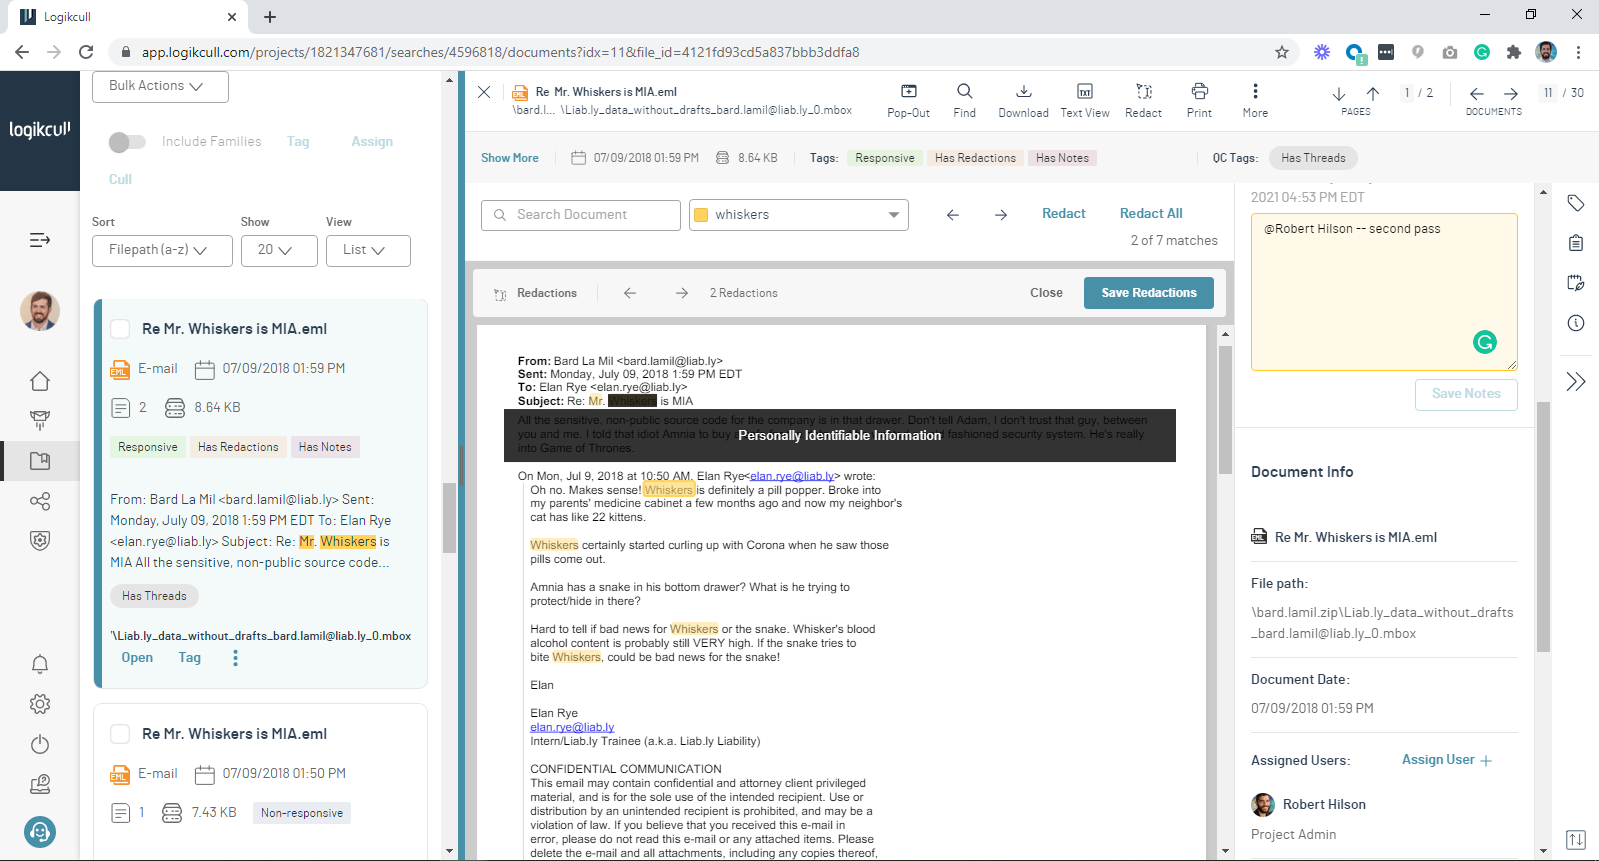 Blast through document review with Logikcull. Apply tags, assign docs, and collaborate with colleagues. Use persistent keyword highlights to find important information fast and bulk redact sensitive data with just the click of a button.